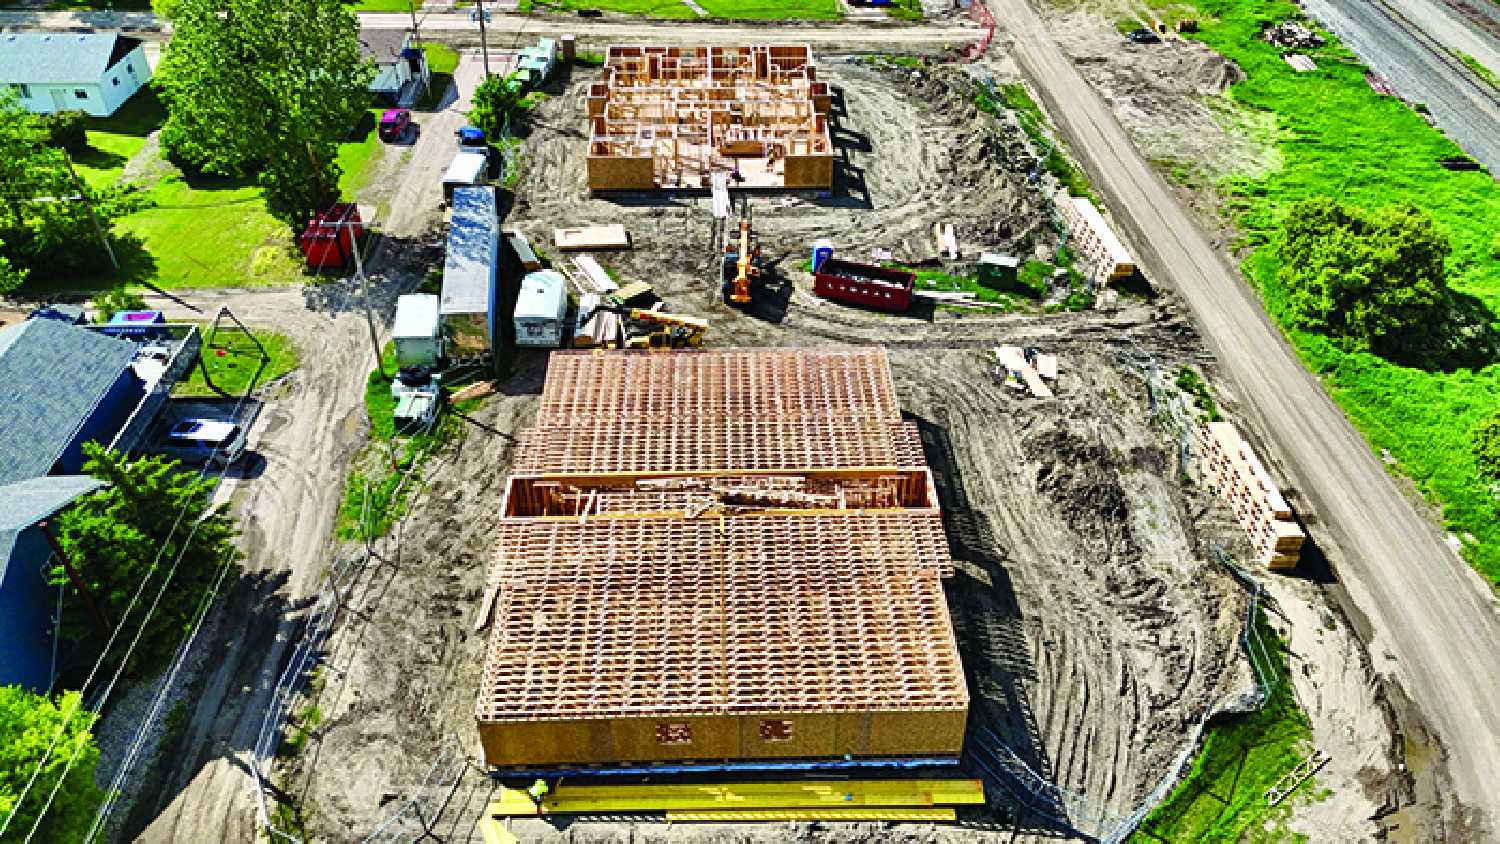 ew apartments under construction Keller Developments is building two apartment buildings on South Front Street in Moosomin. The 24 apartme